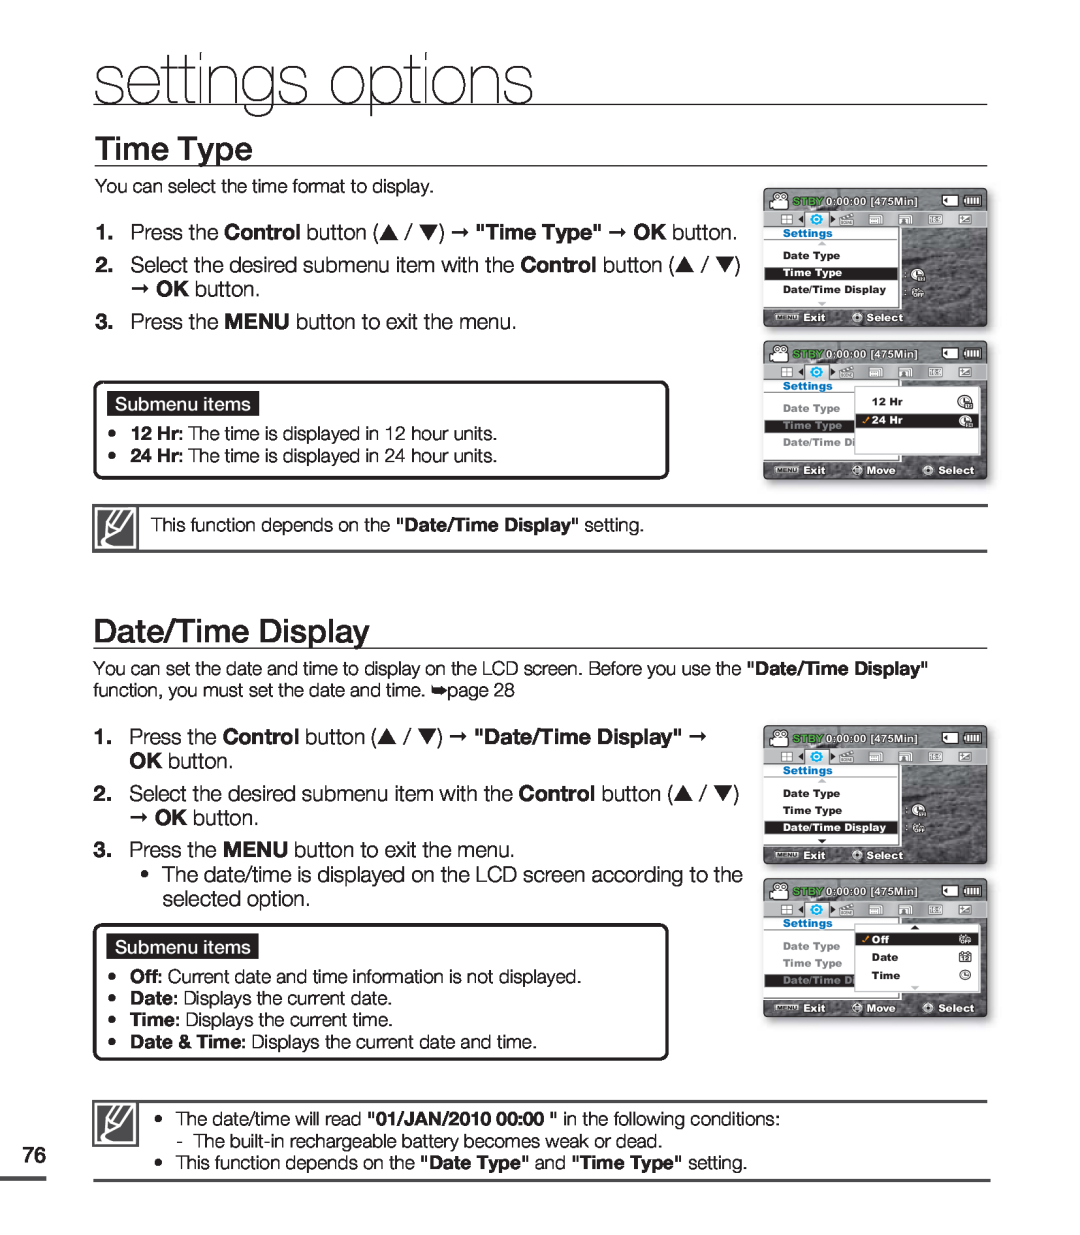 Samsung SMX-C24RP/EDC manual Time Type, Press the Control button / Date/Time Display OK button, settings options 